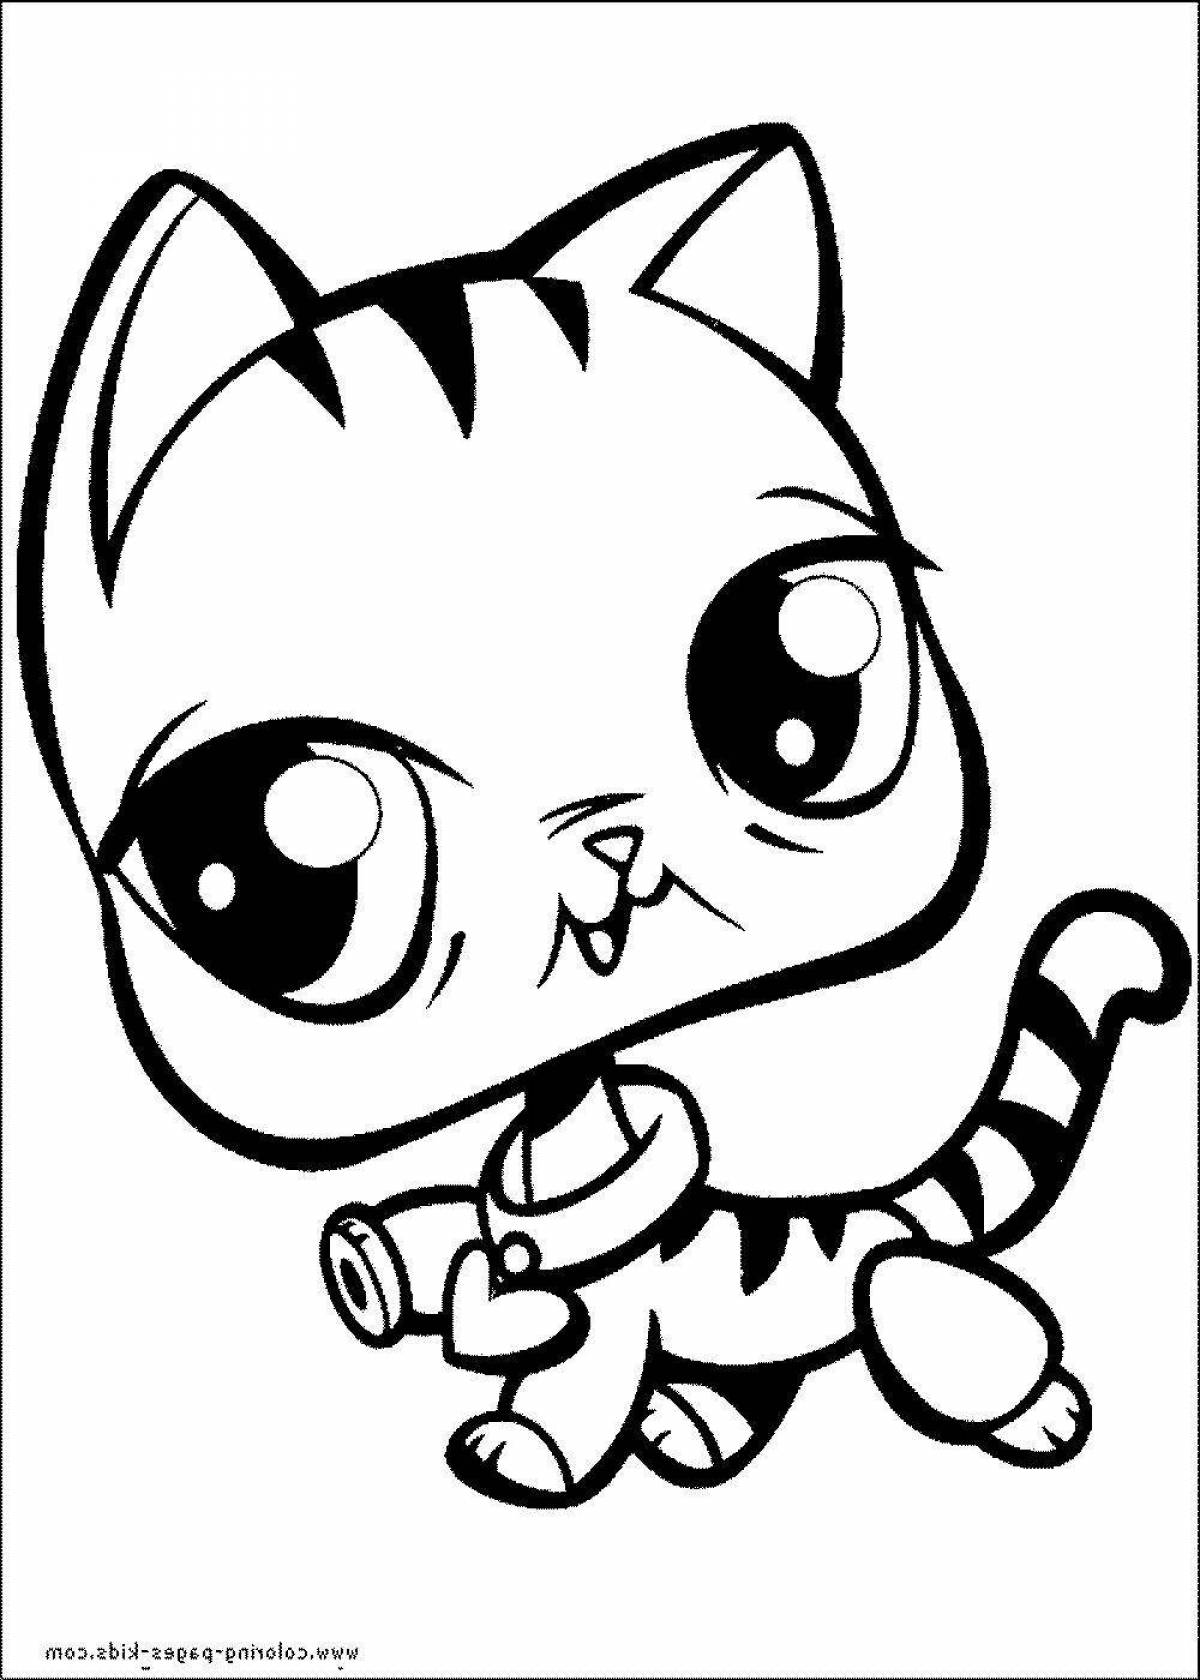 Cute and fluffy kitten coloring book